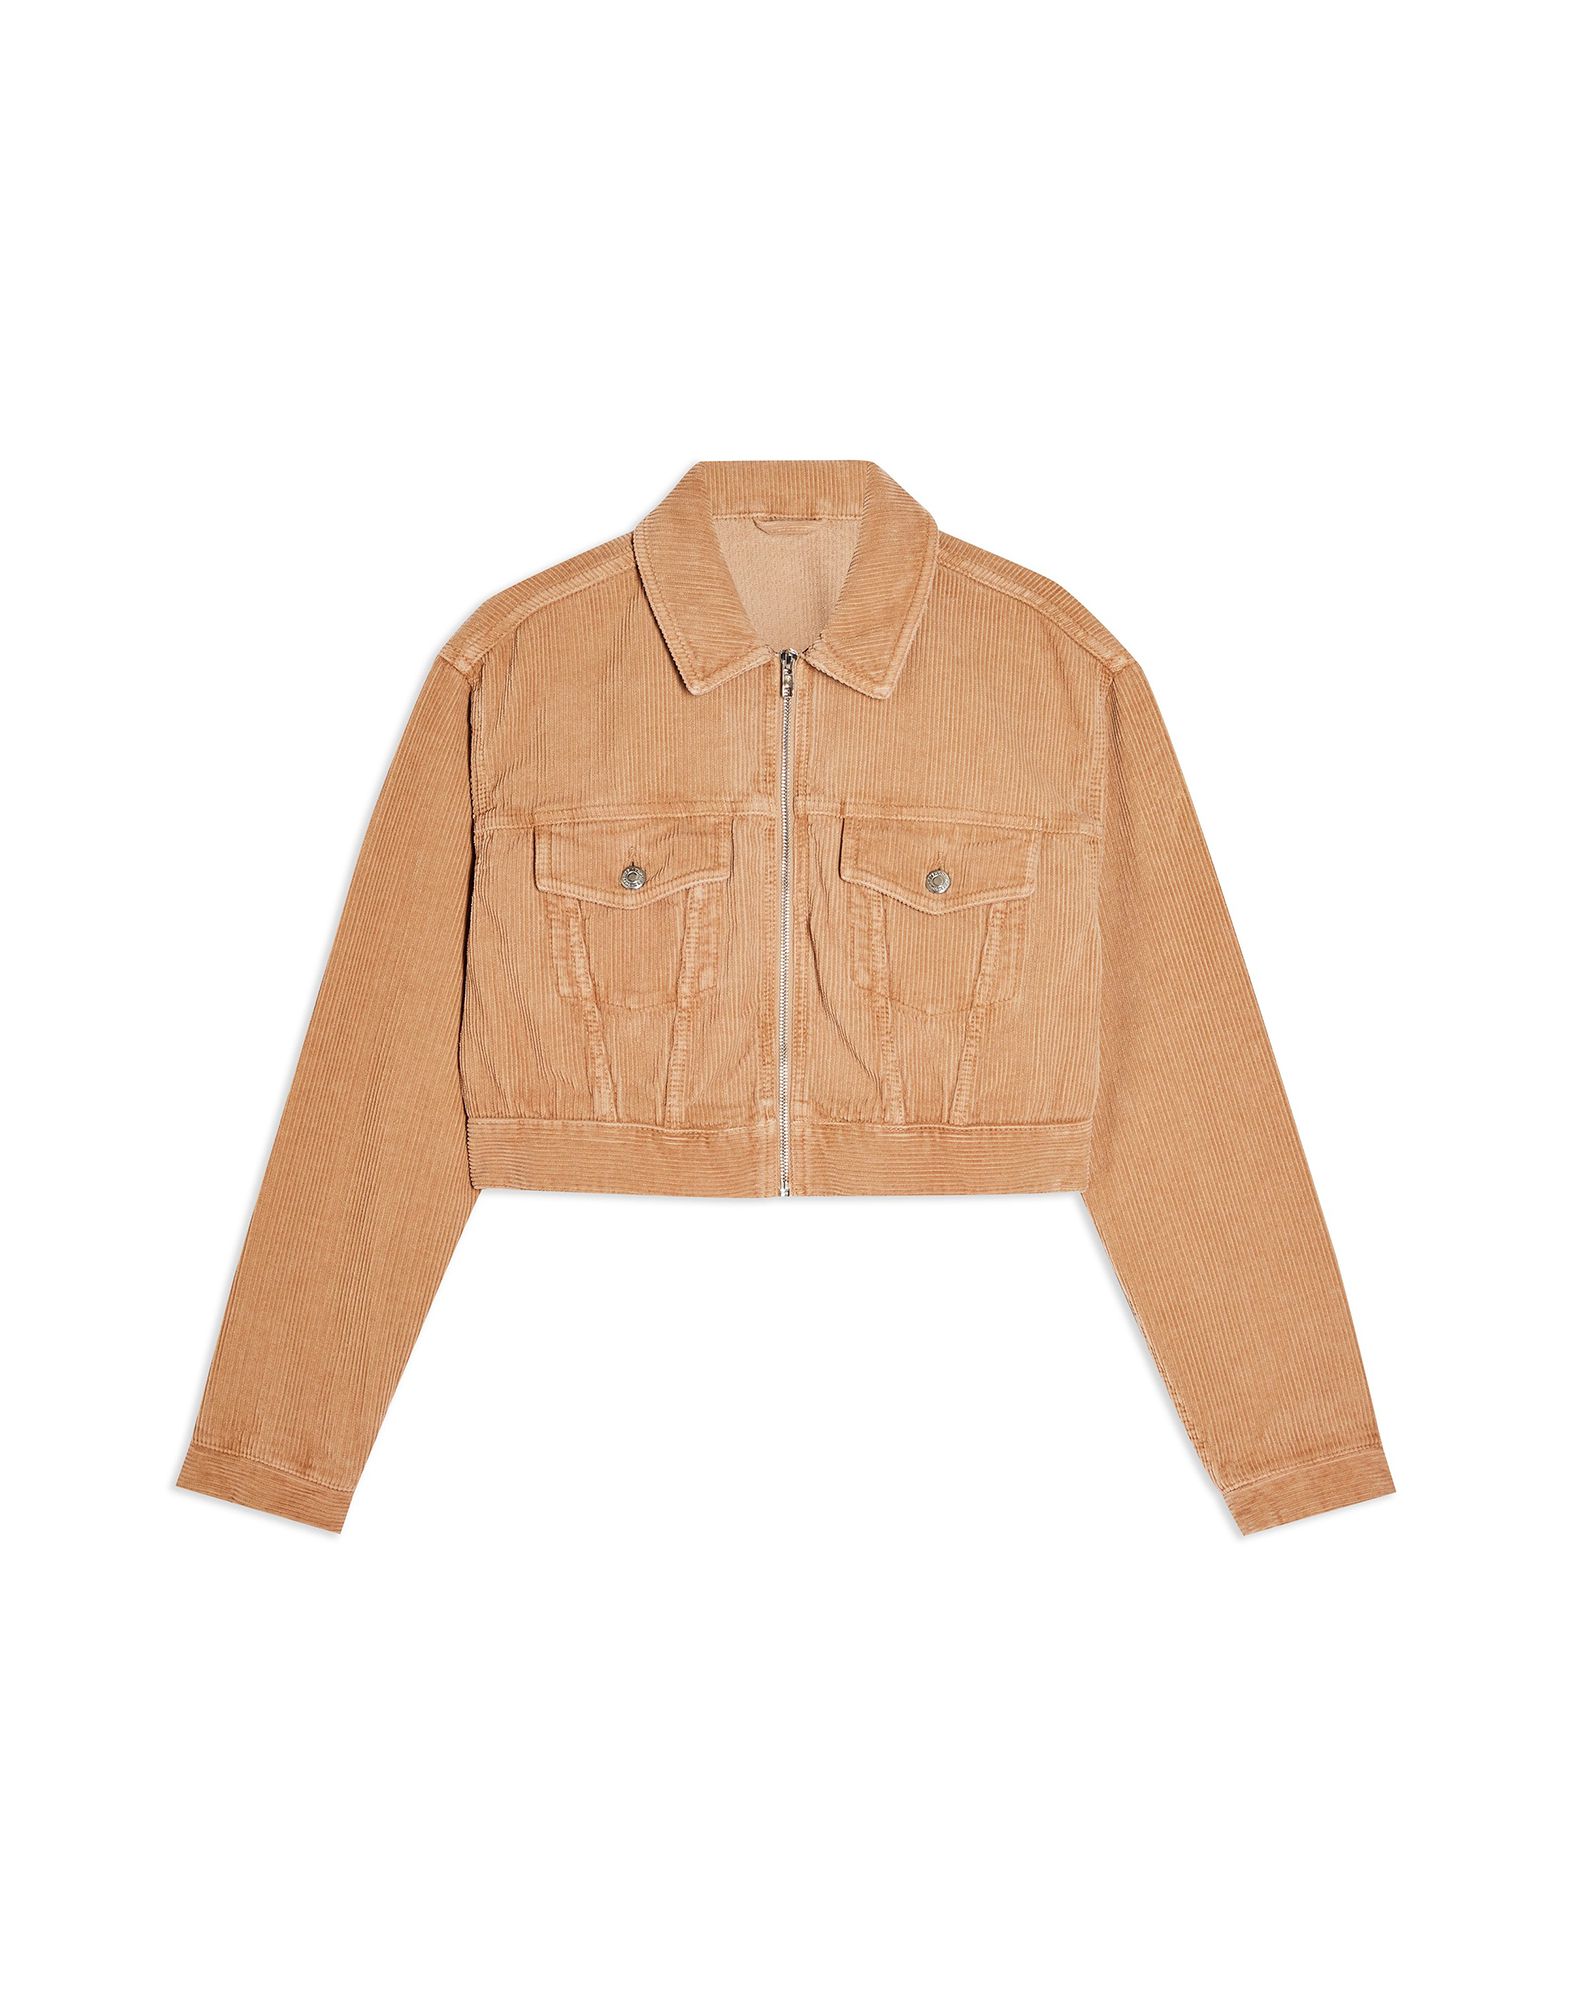 ＜YOOX＞ ★58%OFF！TOPSHOP レディース ブルゾン キャメル 6 コットン 100% SAND CORDUROY ZIP FRONT FITTED JACKET画像